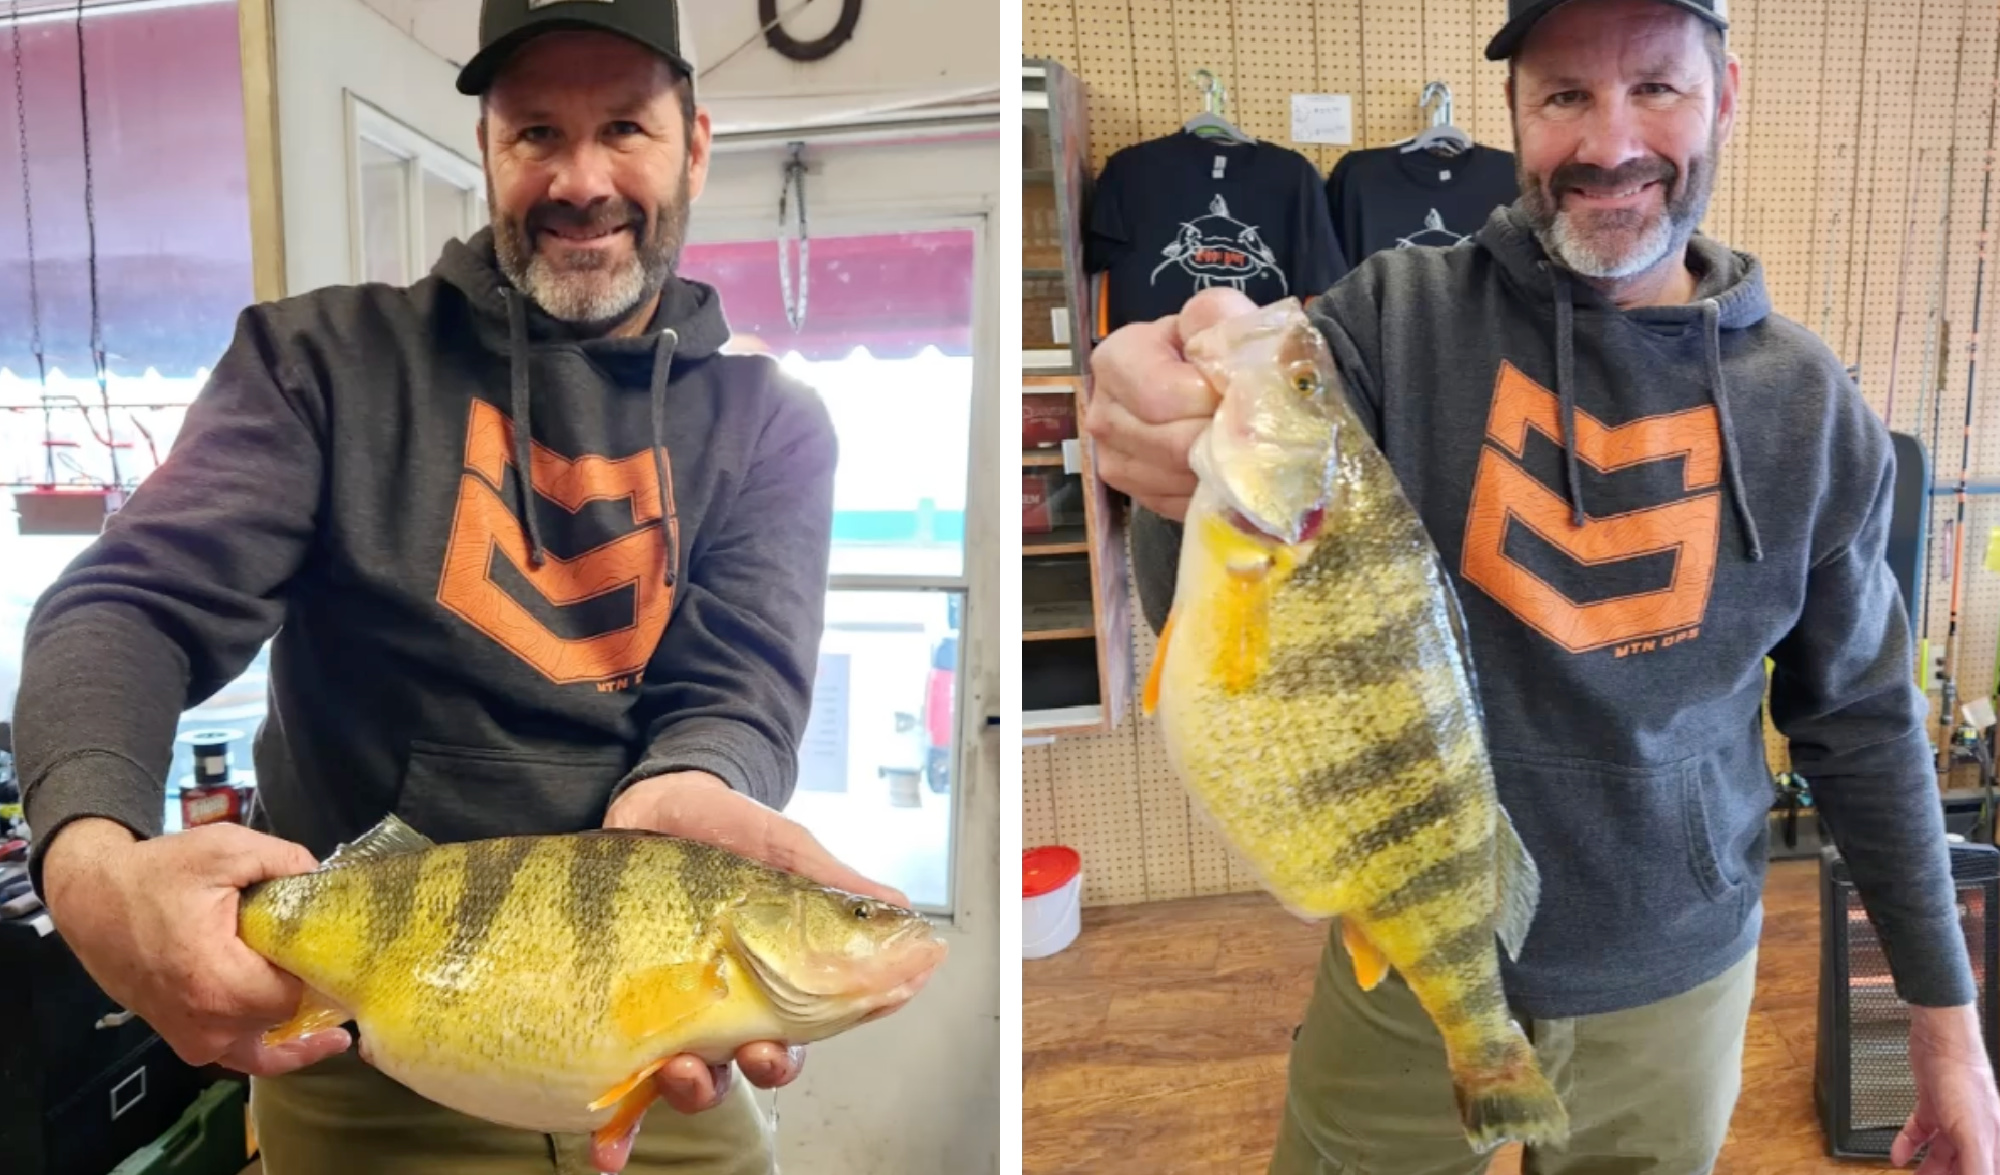 There’s a New Pennsylvania State-Record Yellow Perch, and It Weighs 3 Pounds